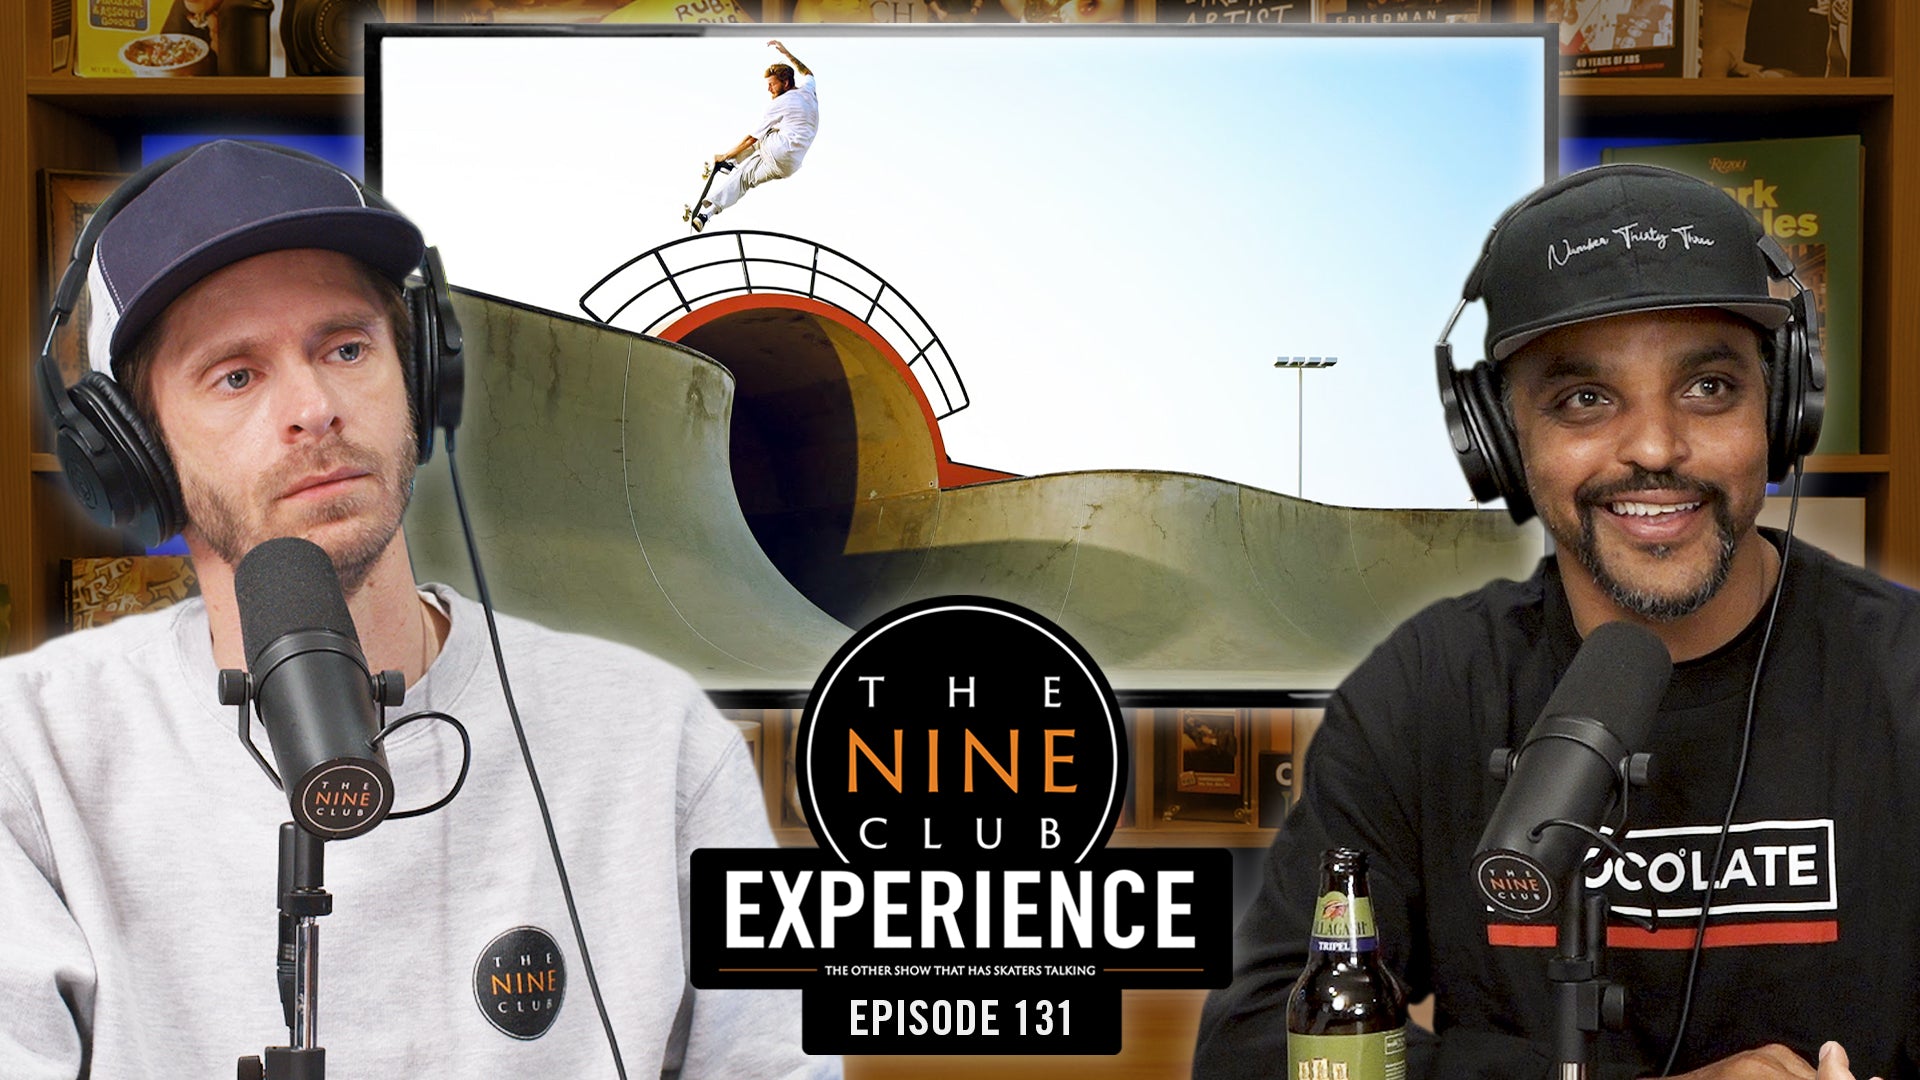 The Nine Club Experience Episode 131